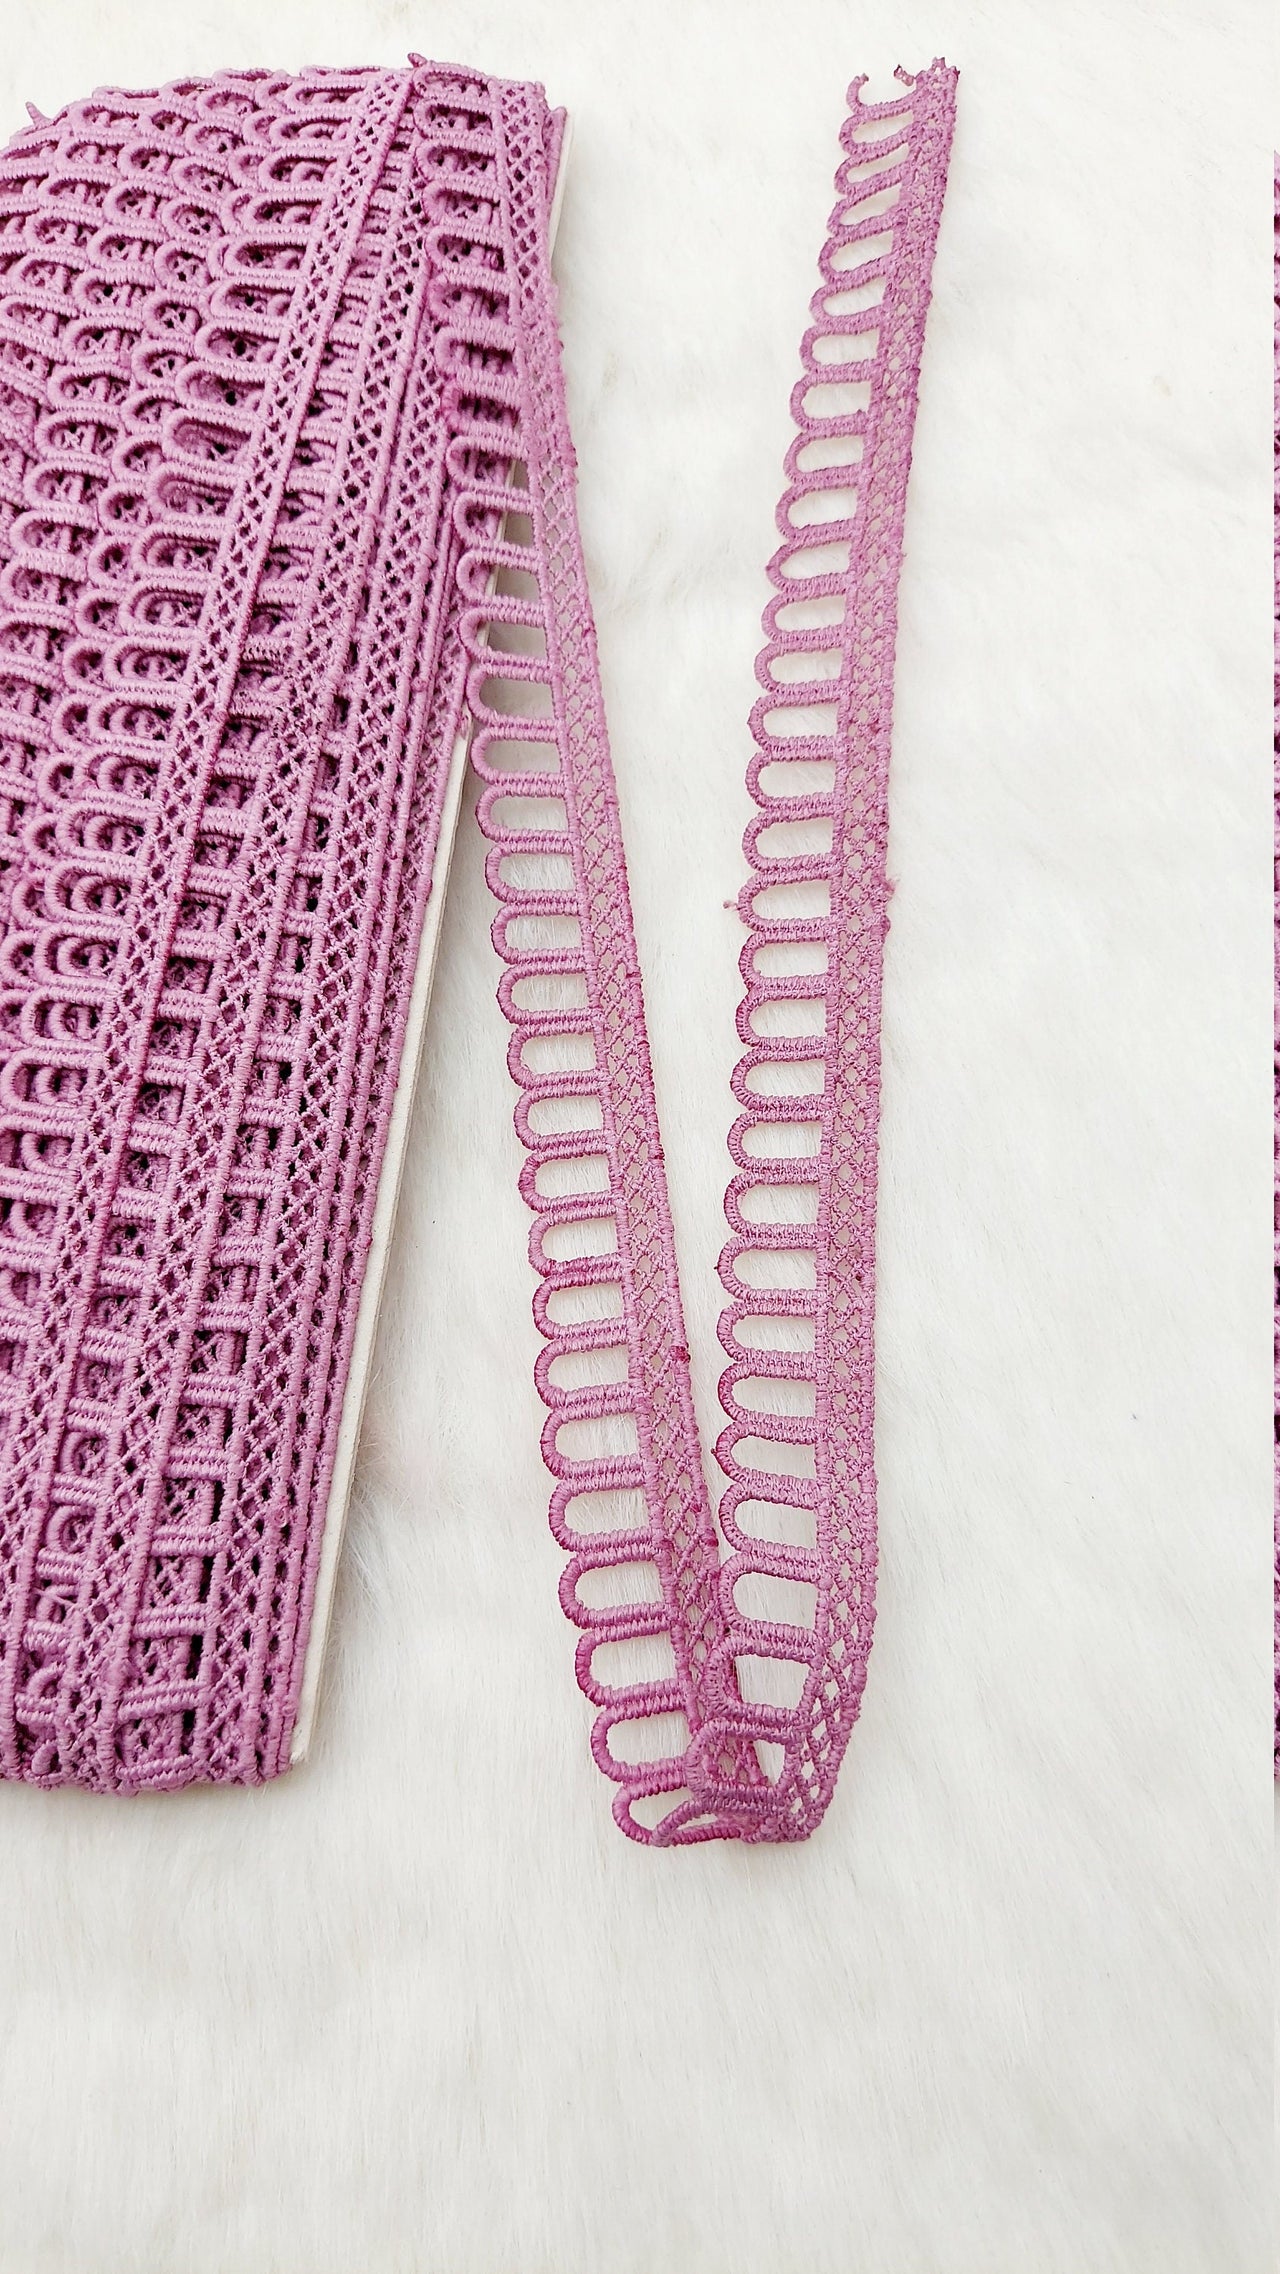 9 Yards Mauve Pink Embroidery Cotton Lace Trim, Approx. 20mm Wide, Fringe Trim